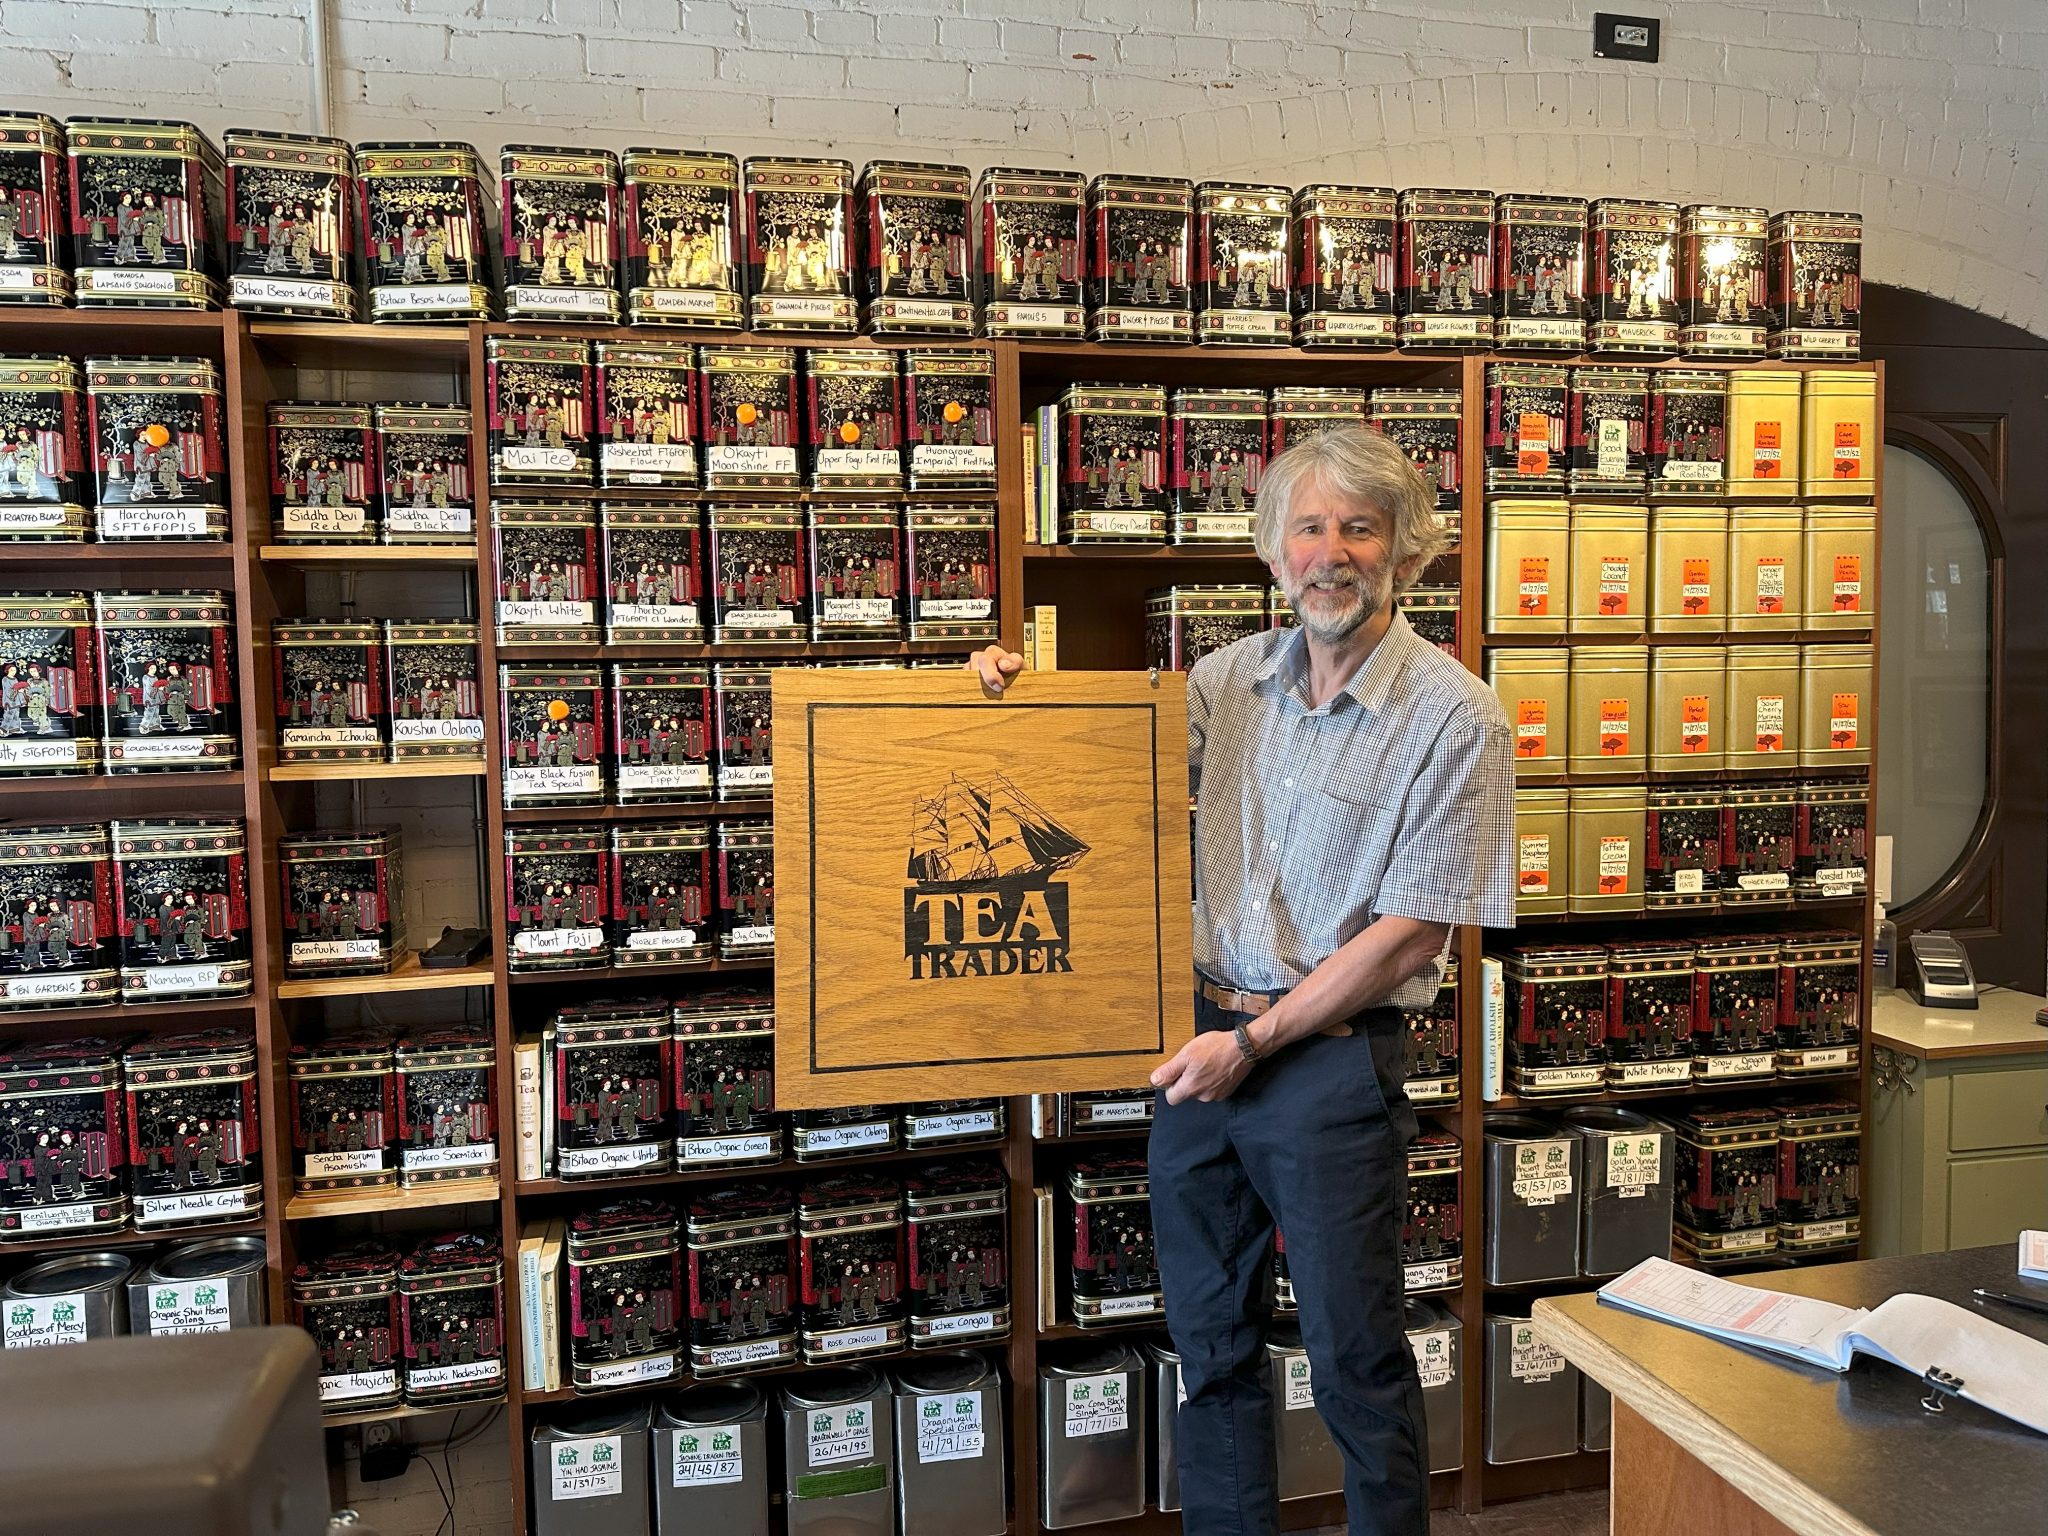 Ted Jones standing in front of a wall of tea, holding a Tea Trader sign.